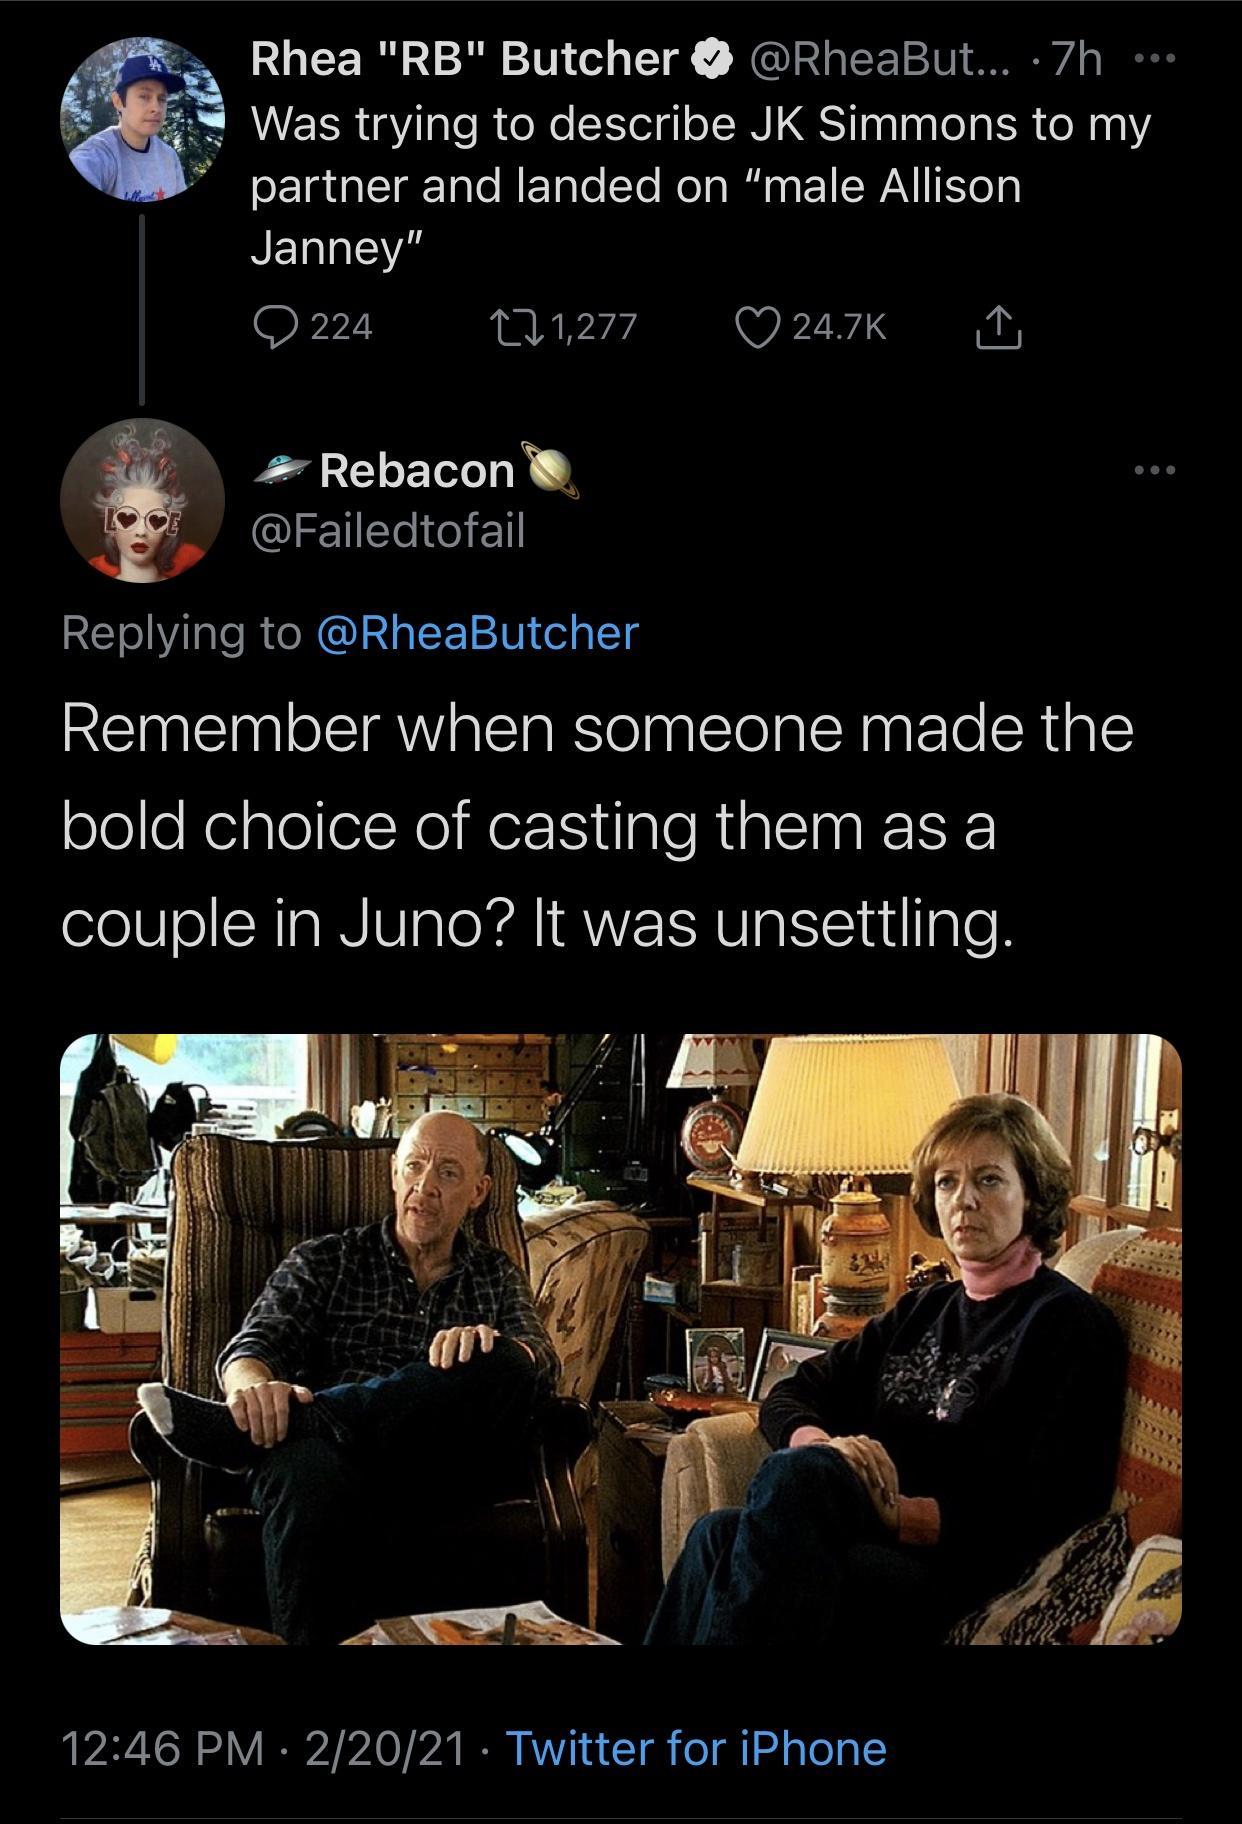 music - Rhea "Rb" Butcher ... .7h Was trying to describe Jk Simmons to my partner and landed on "male Allison Janney" 224 121,277 Rebacon Remember when someone made the bold choice of casting them as a couple in Juno? It was unsettling. 22021 Twitter for 